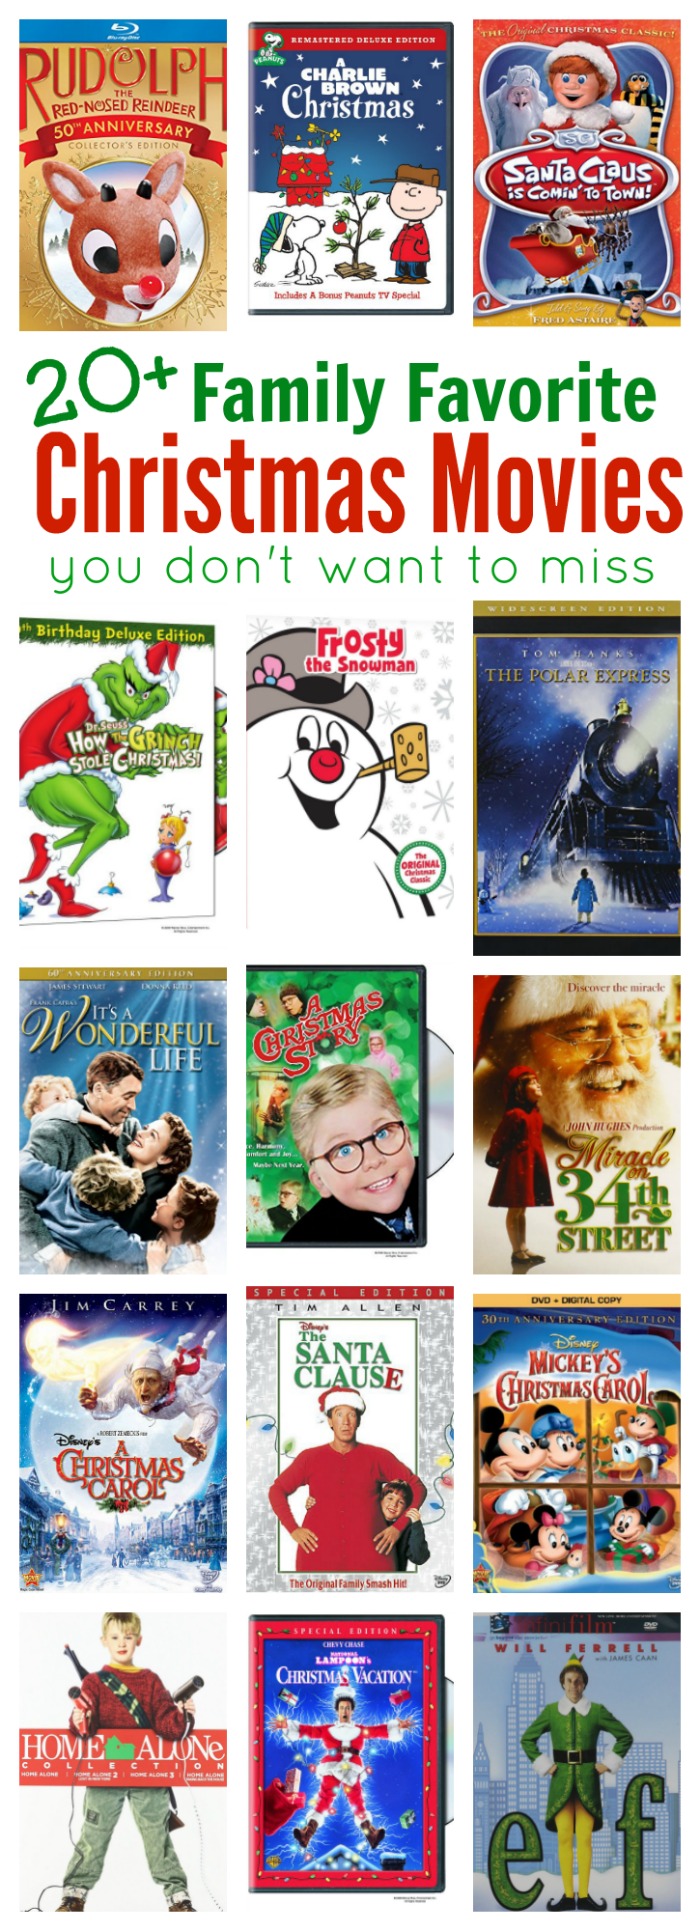 Make watching Christmas movies a tradition for your family this holiday season. It's a great way to get into the holiday spirit.  kid movies | family friendly movies | Christmas classics